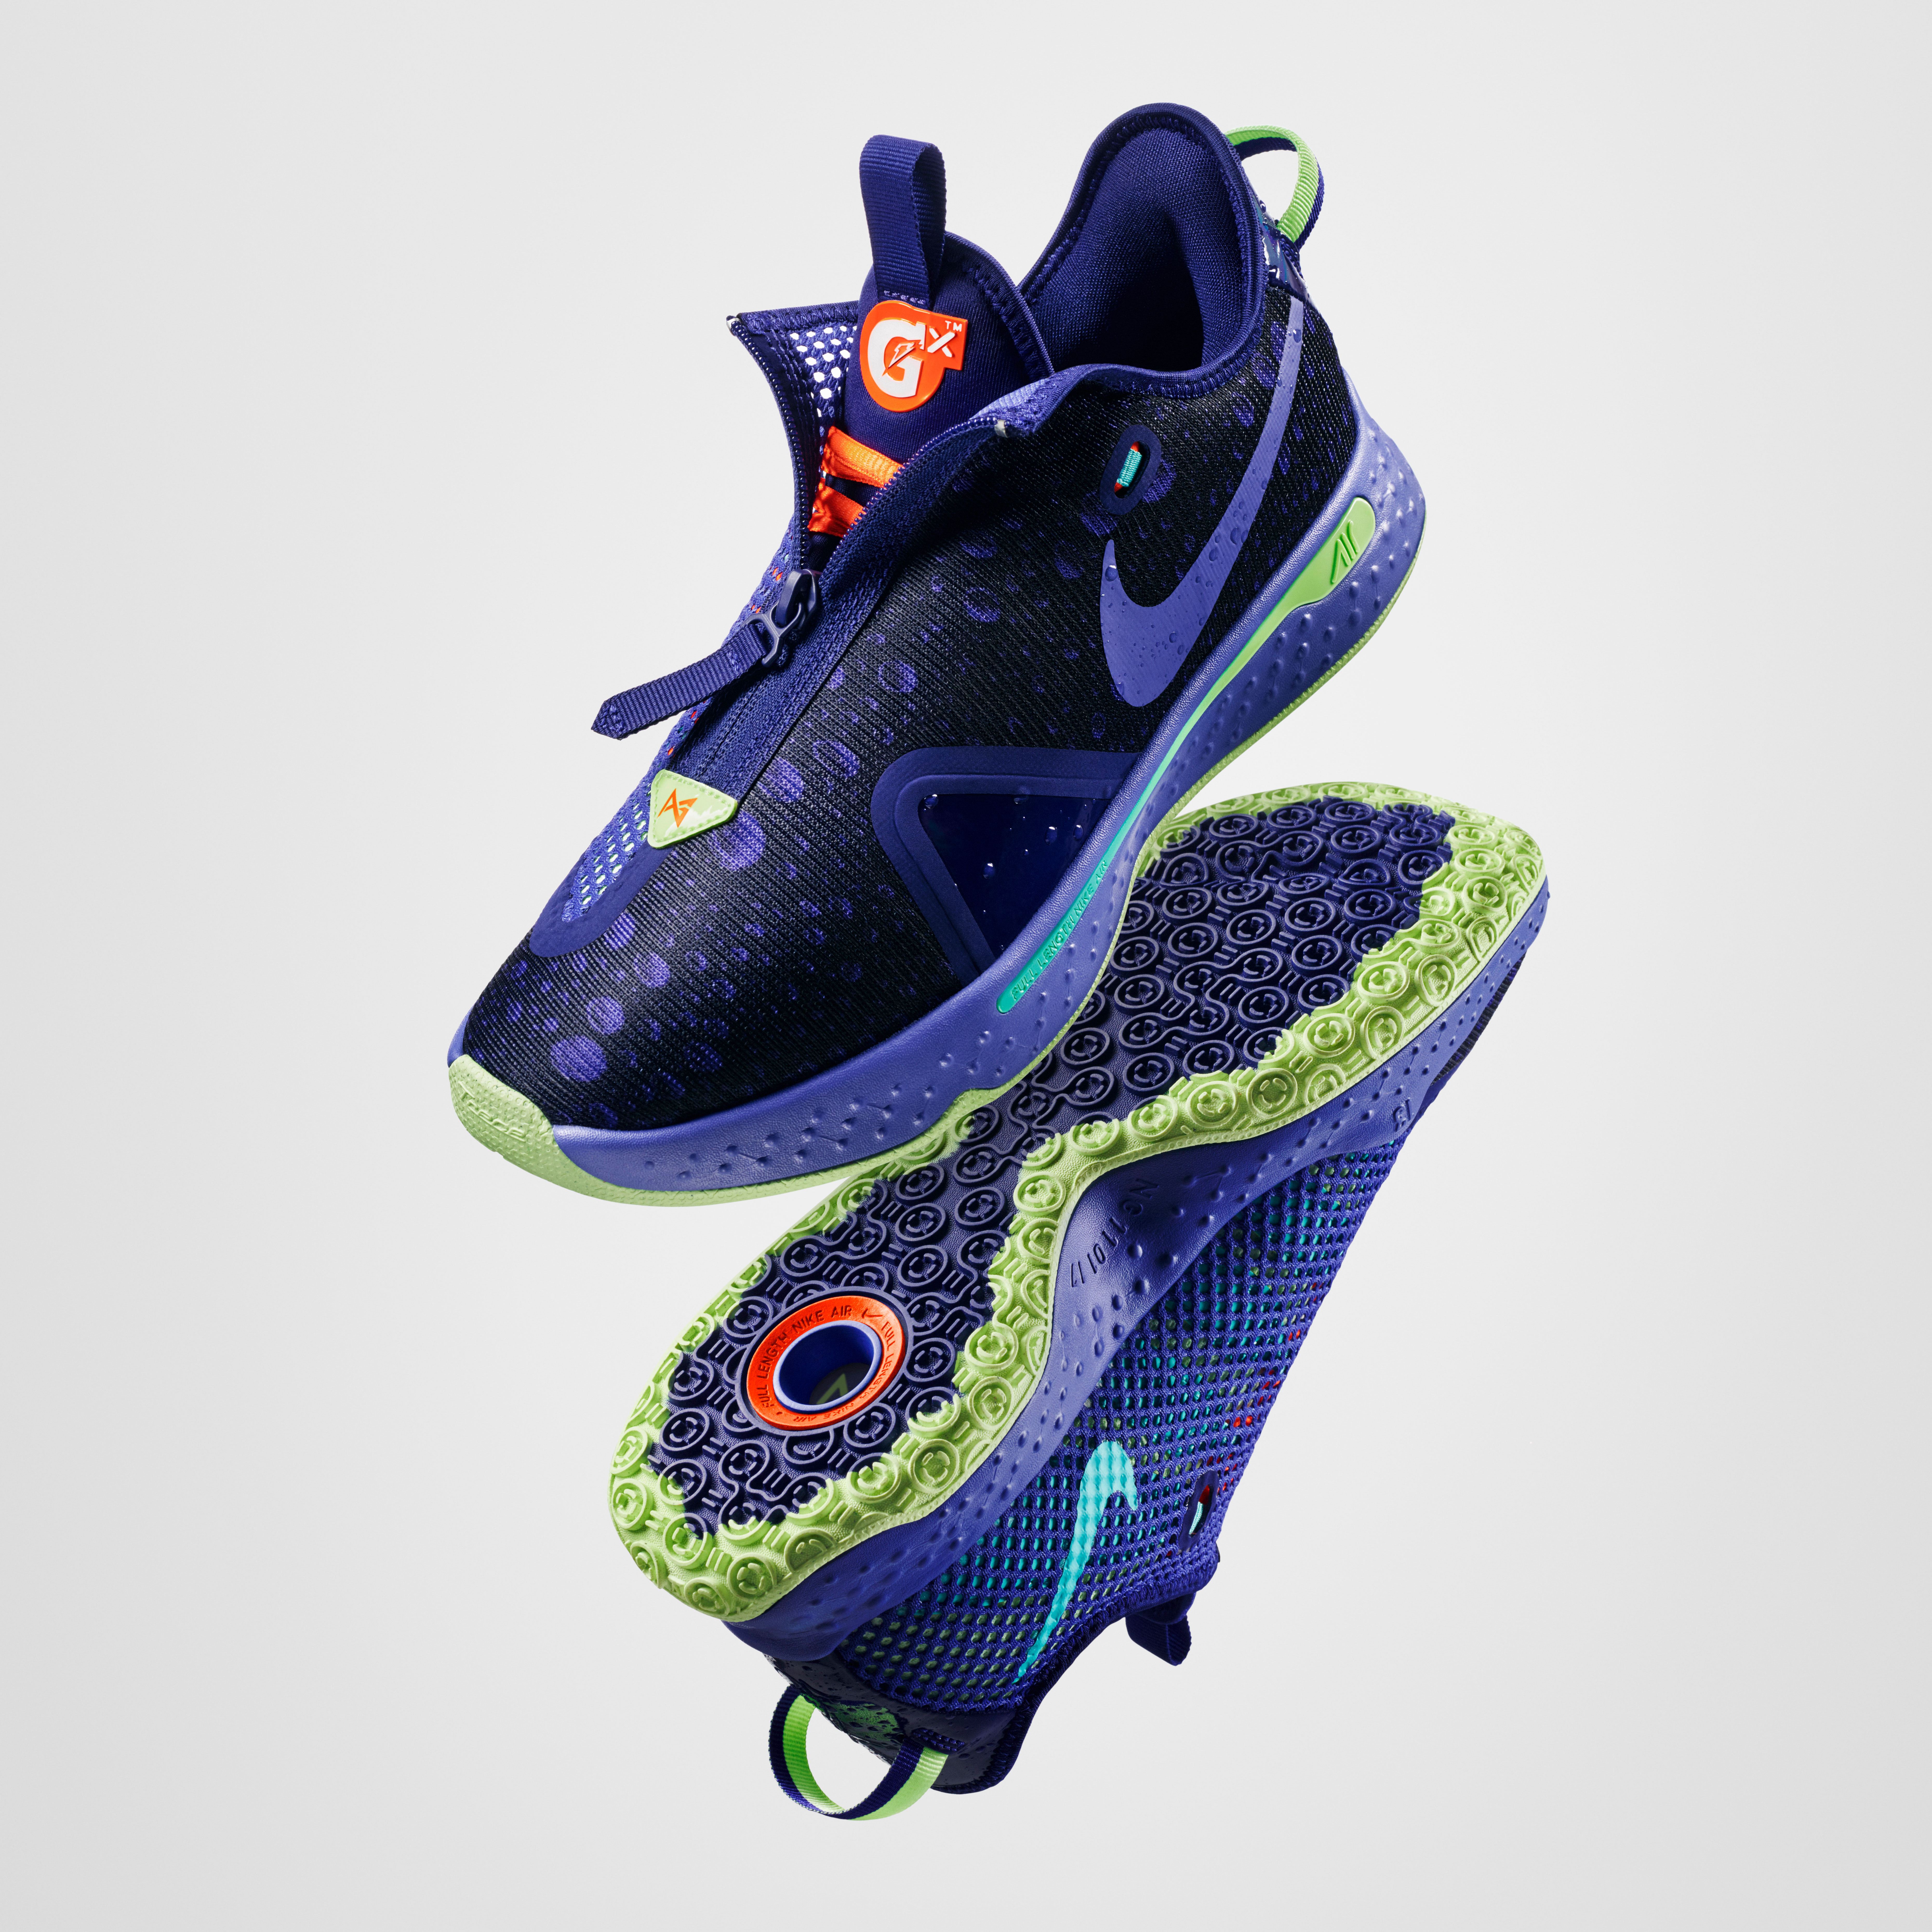 Paul George on X: My new PG4 x Gatorade kicks are 🔥! But the fits not  finished without a personalized Gatorade Gx bottle. Head to   and customize yours!  / X